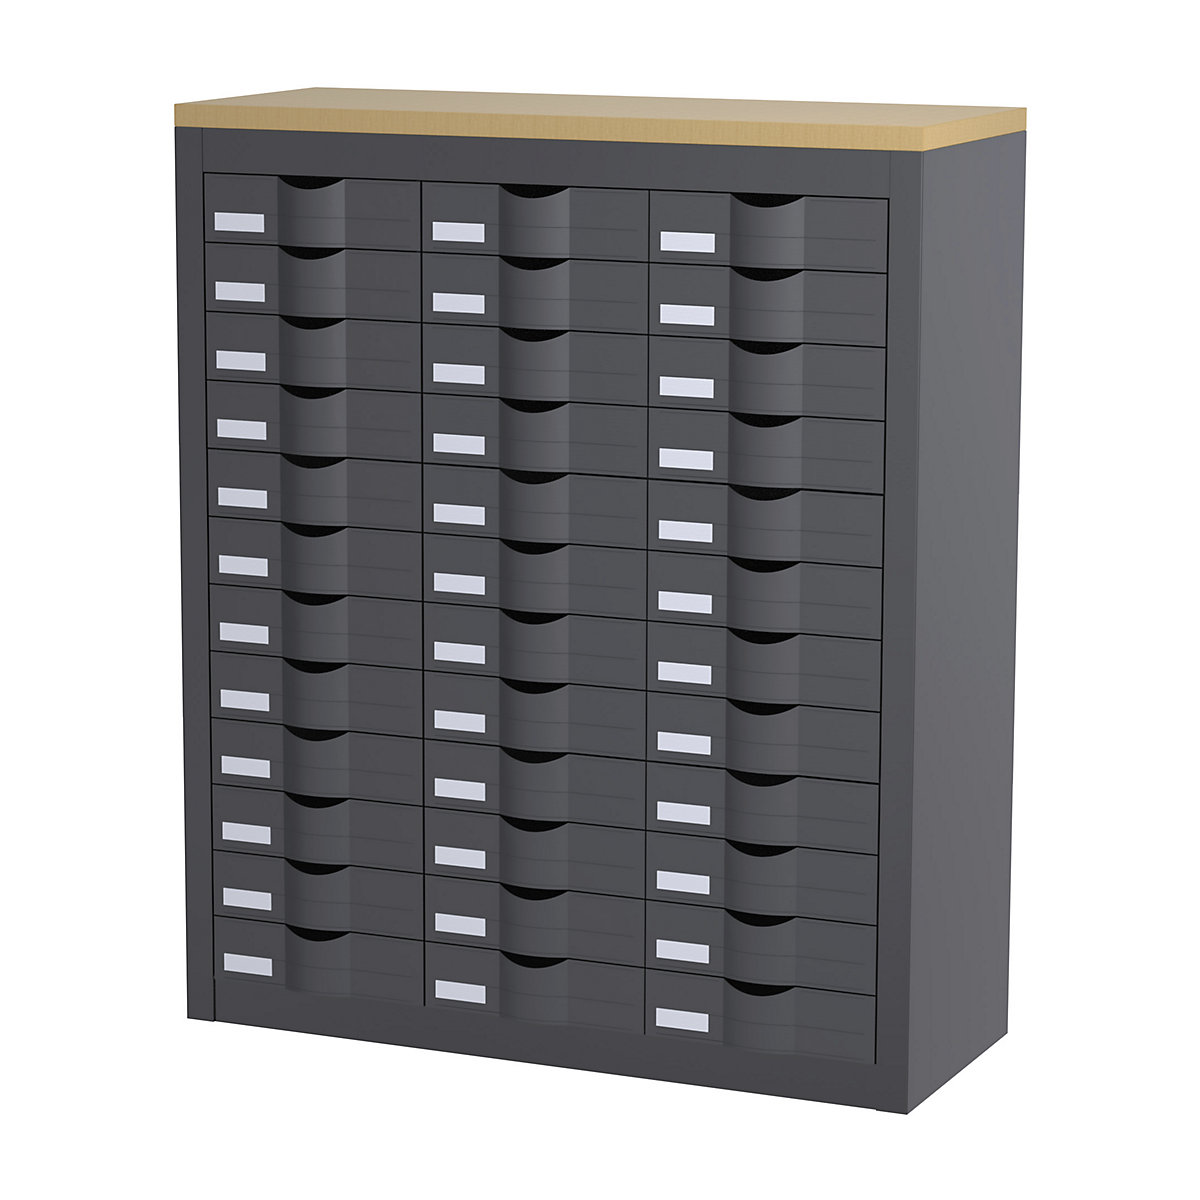 Sorting station, with drawers, 3 rows, 36 drawers, charcoal-4